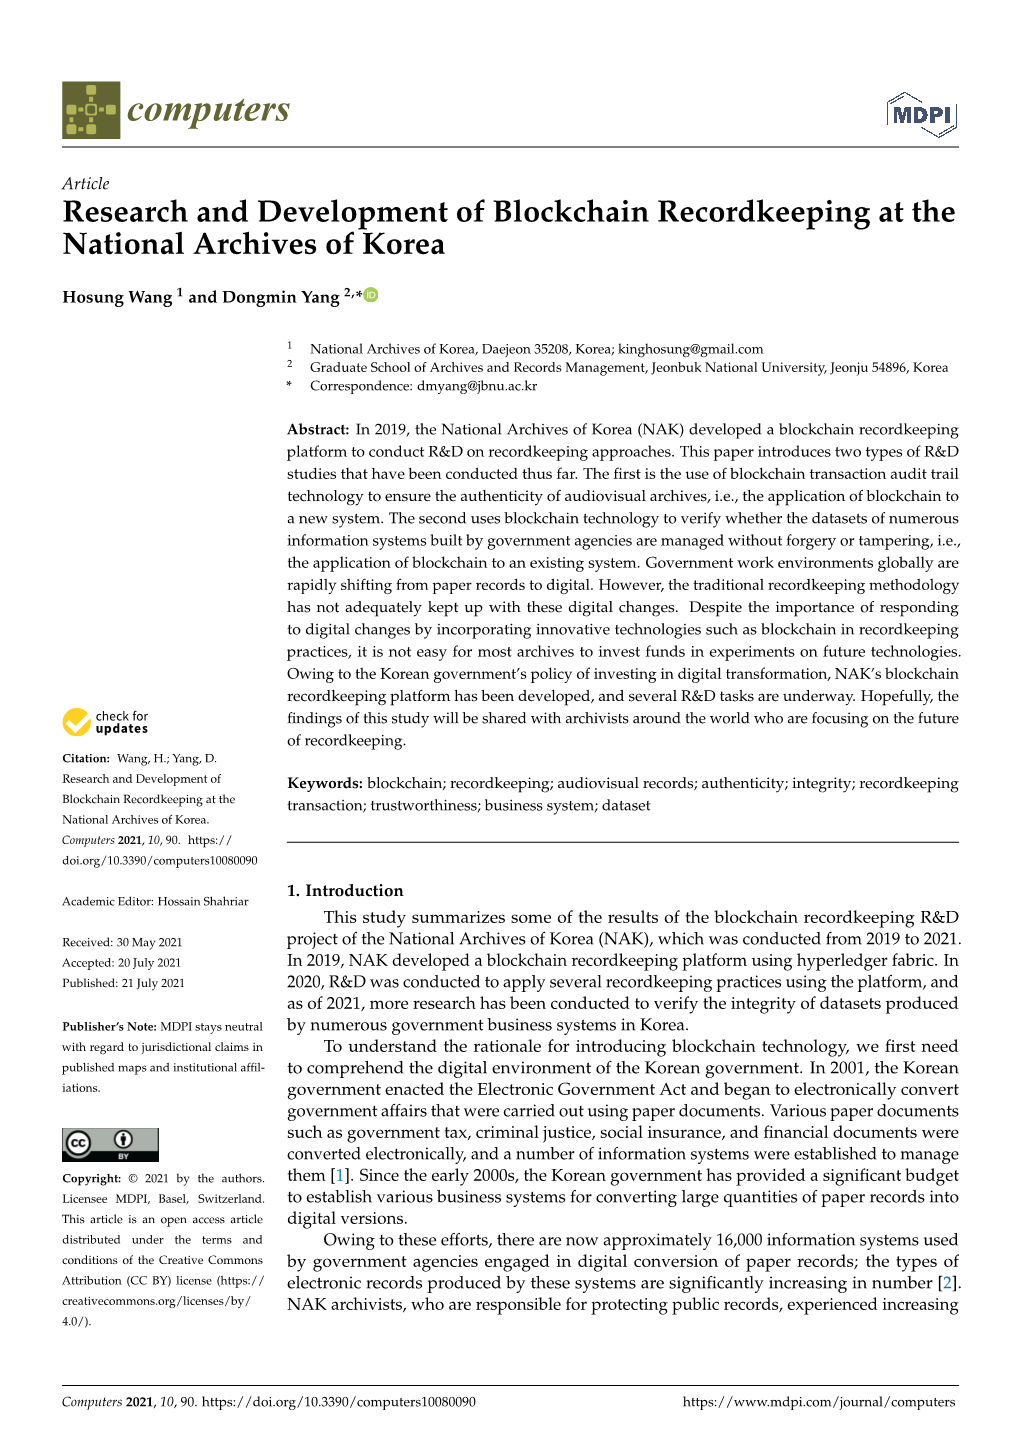 Research and Development of Blockchain Recordkeeping at the National Archives of Korea